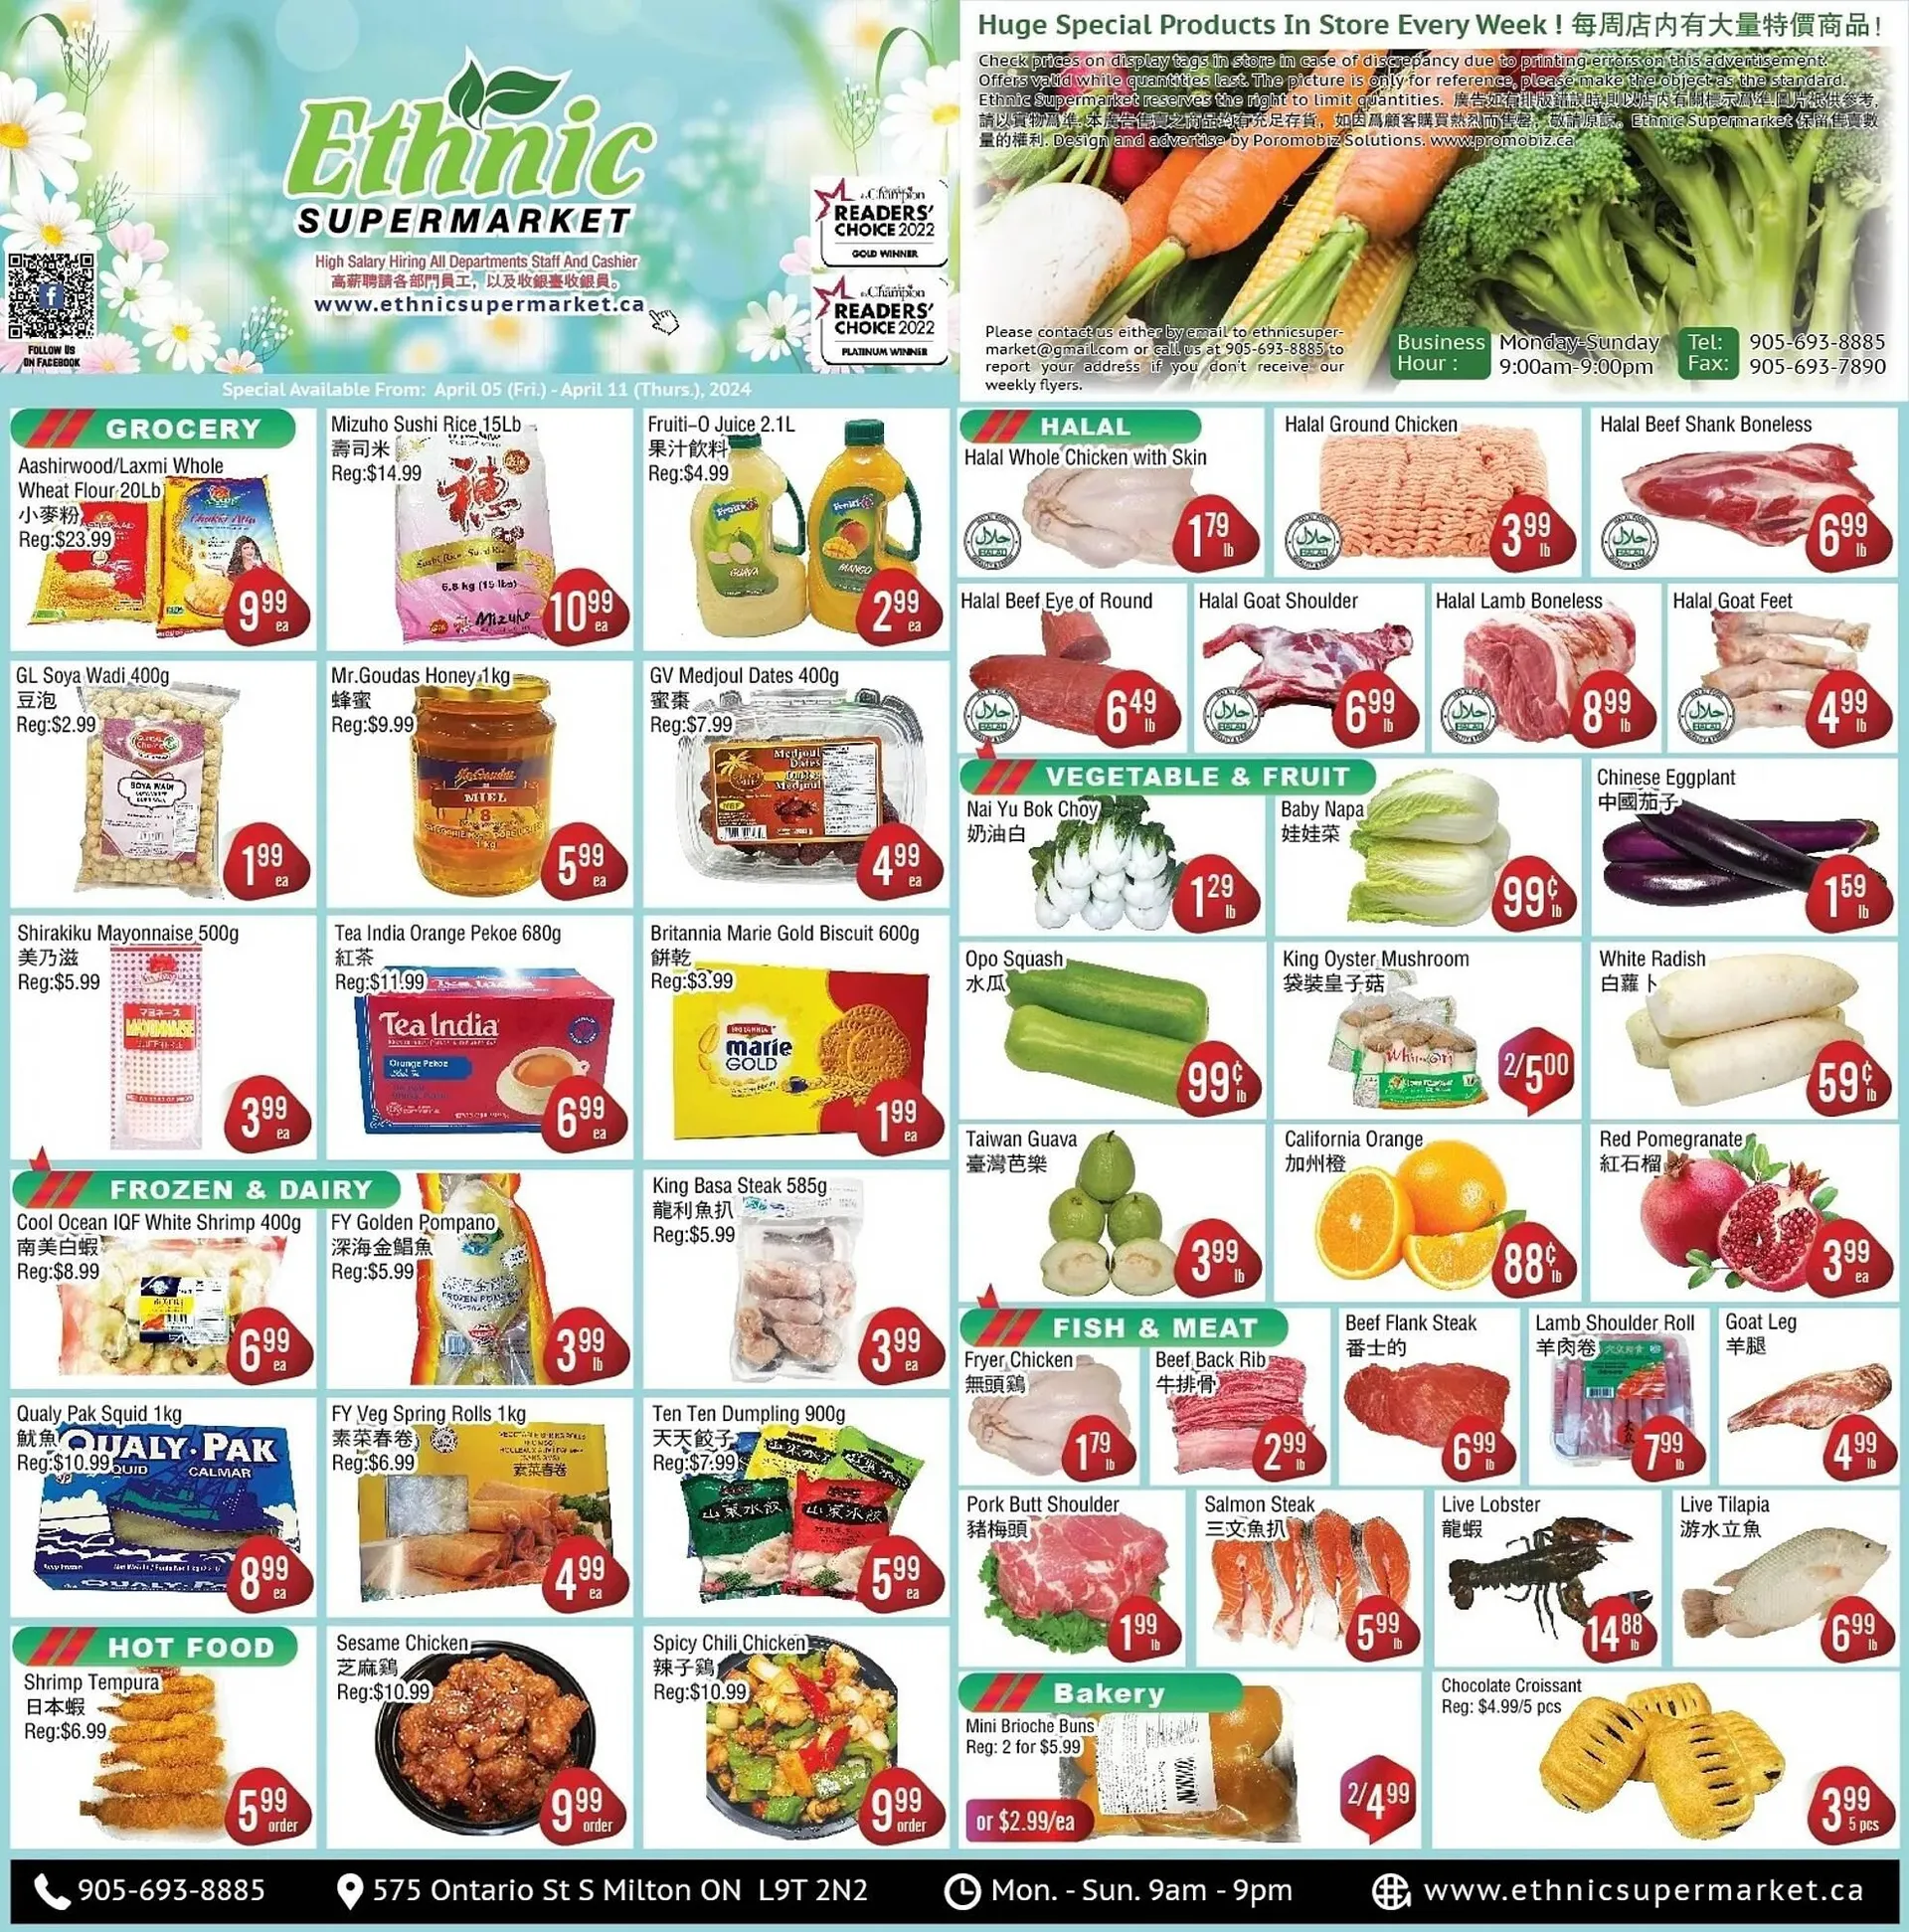 Ethnic Supermarket flyer from April 3 to April 11 2024 - flyer page 